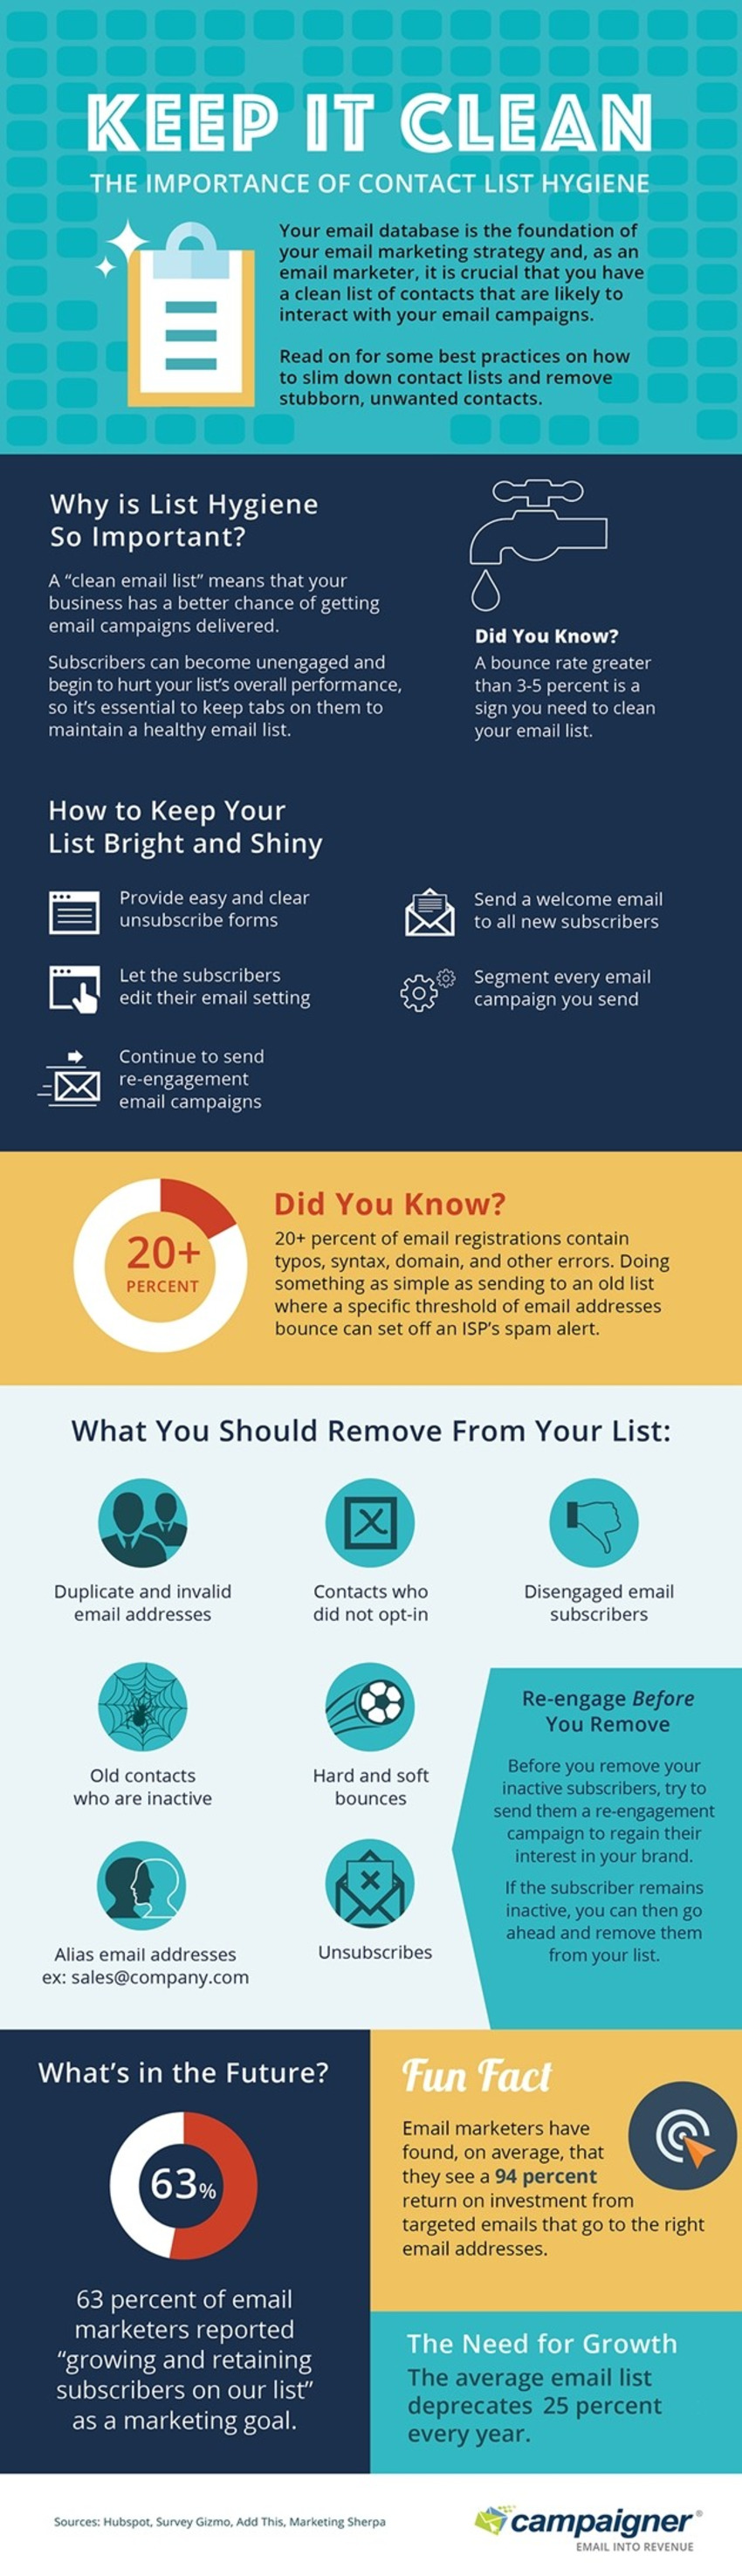 Keep It Clean: The Importance of Email-List Hygiene [Infographic] - Profs | The MarTech Digest | Scoop.it